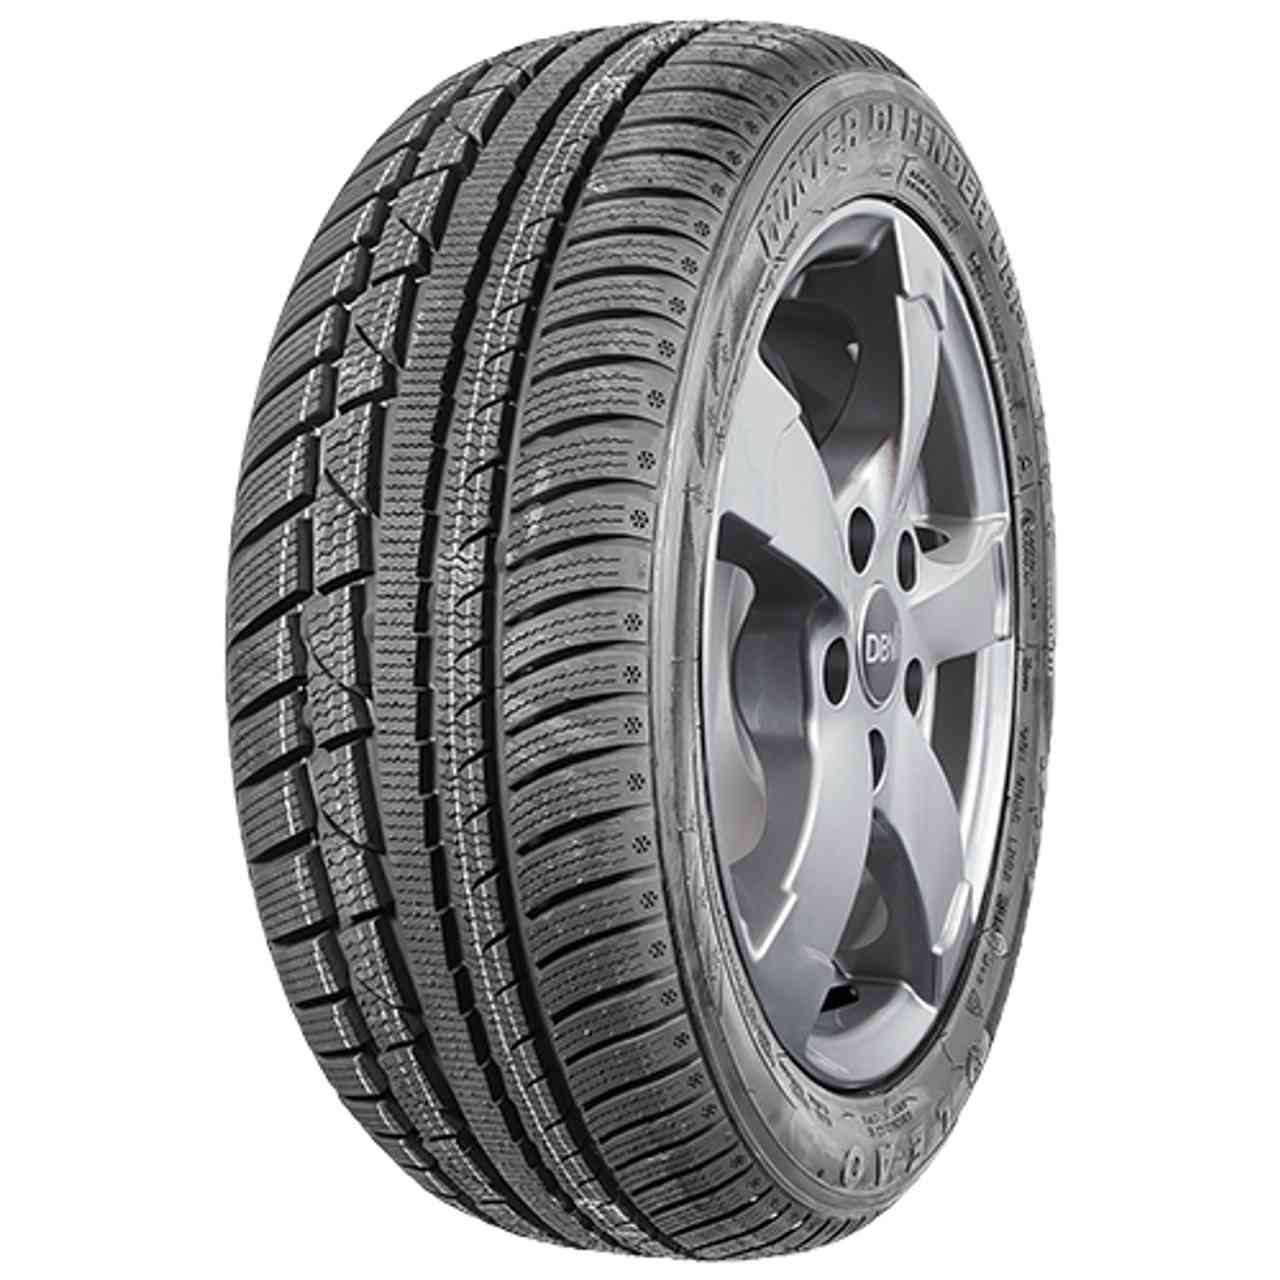 LEAO WINTER DEFENDER UHP 195/55R16 91H BSW von LEAO